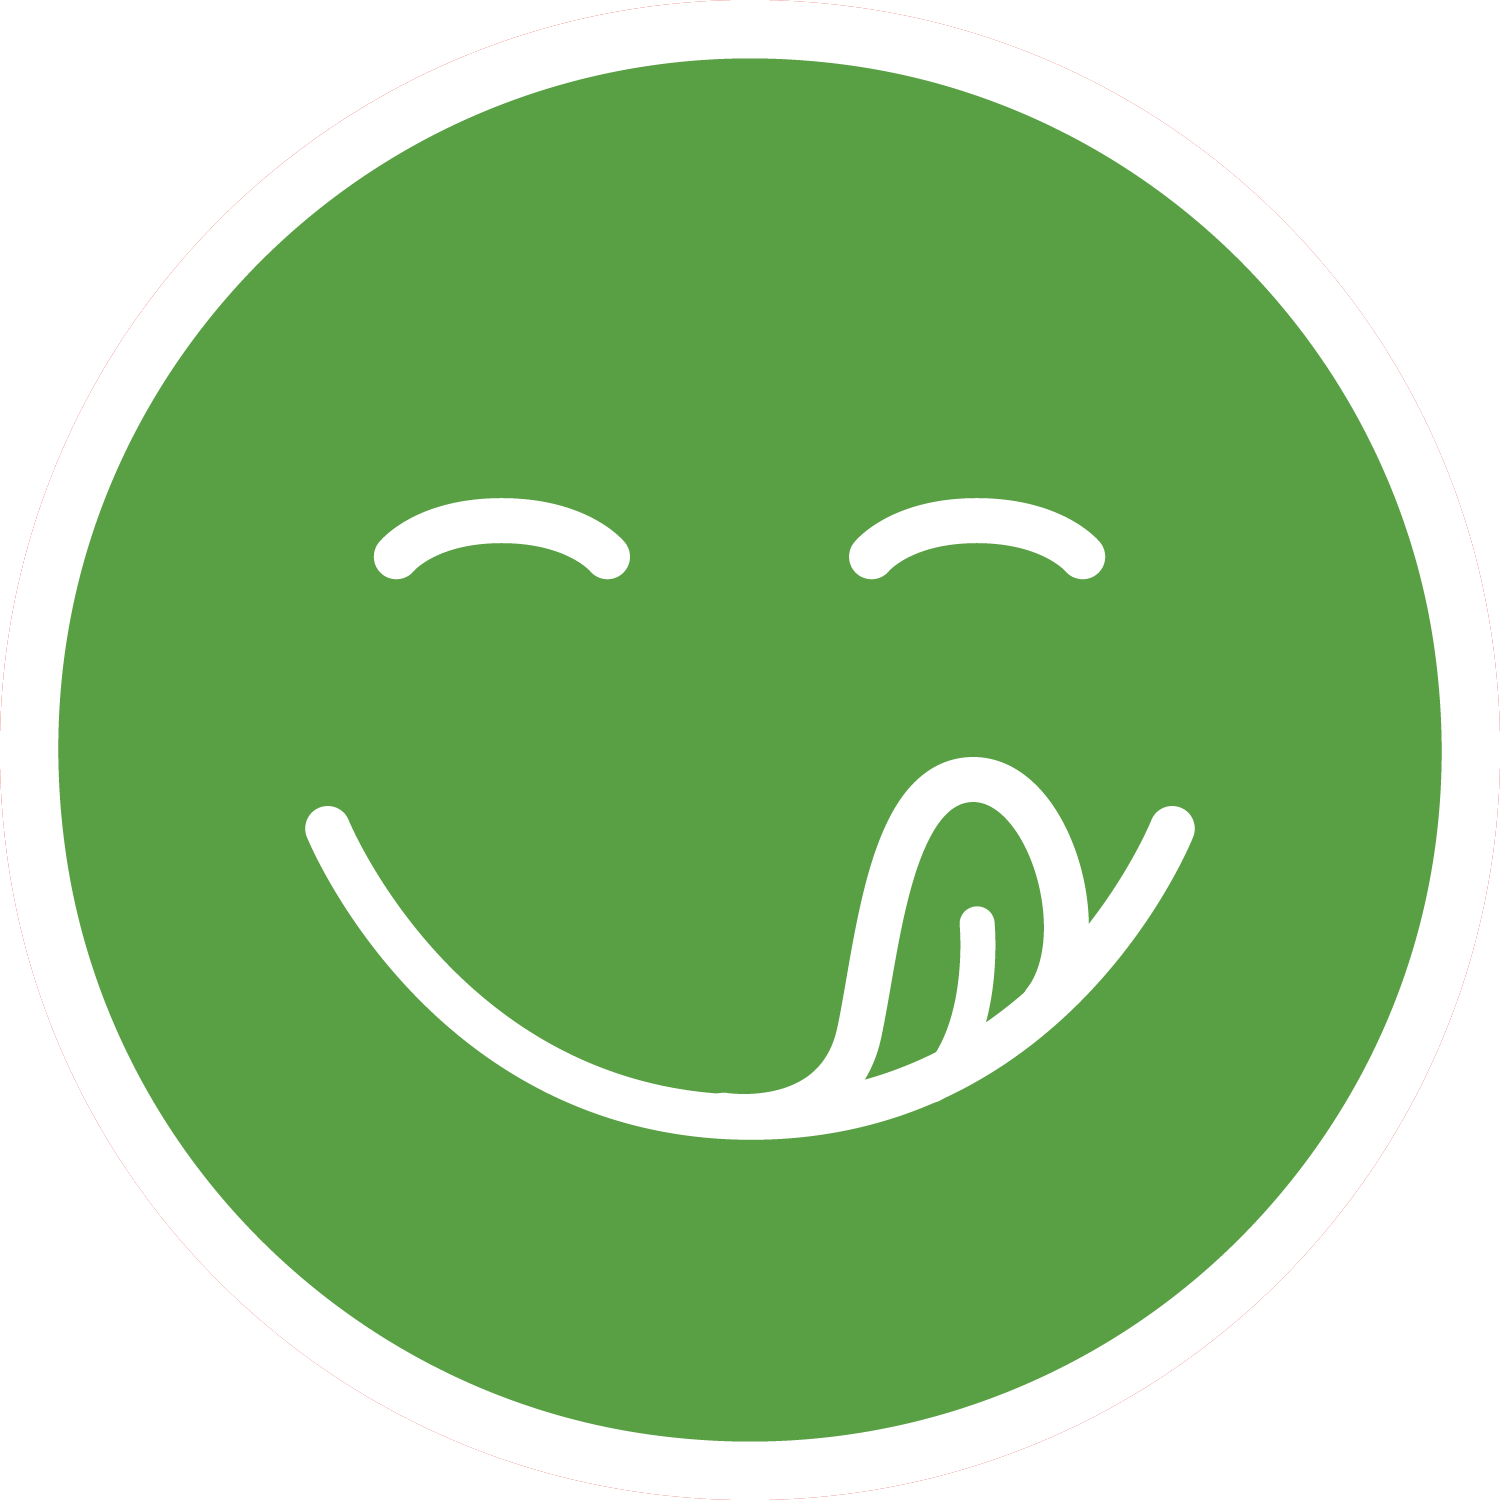 A circular green icon of a smiley face outlined in white